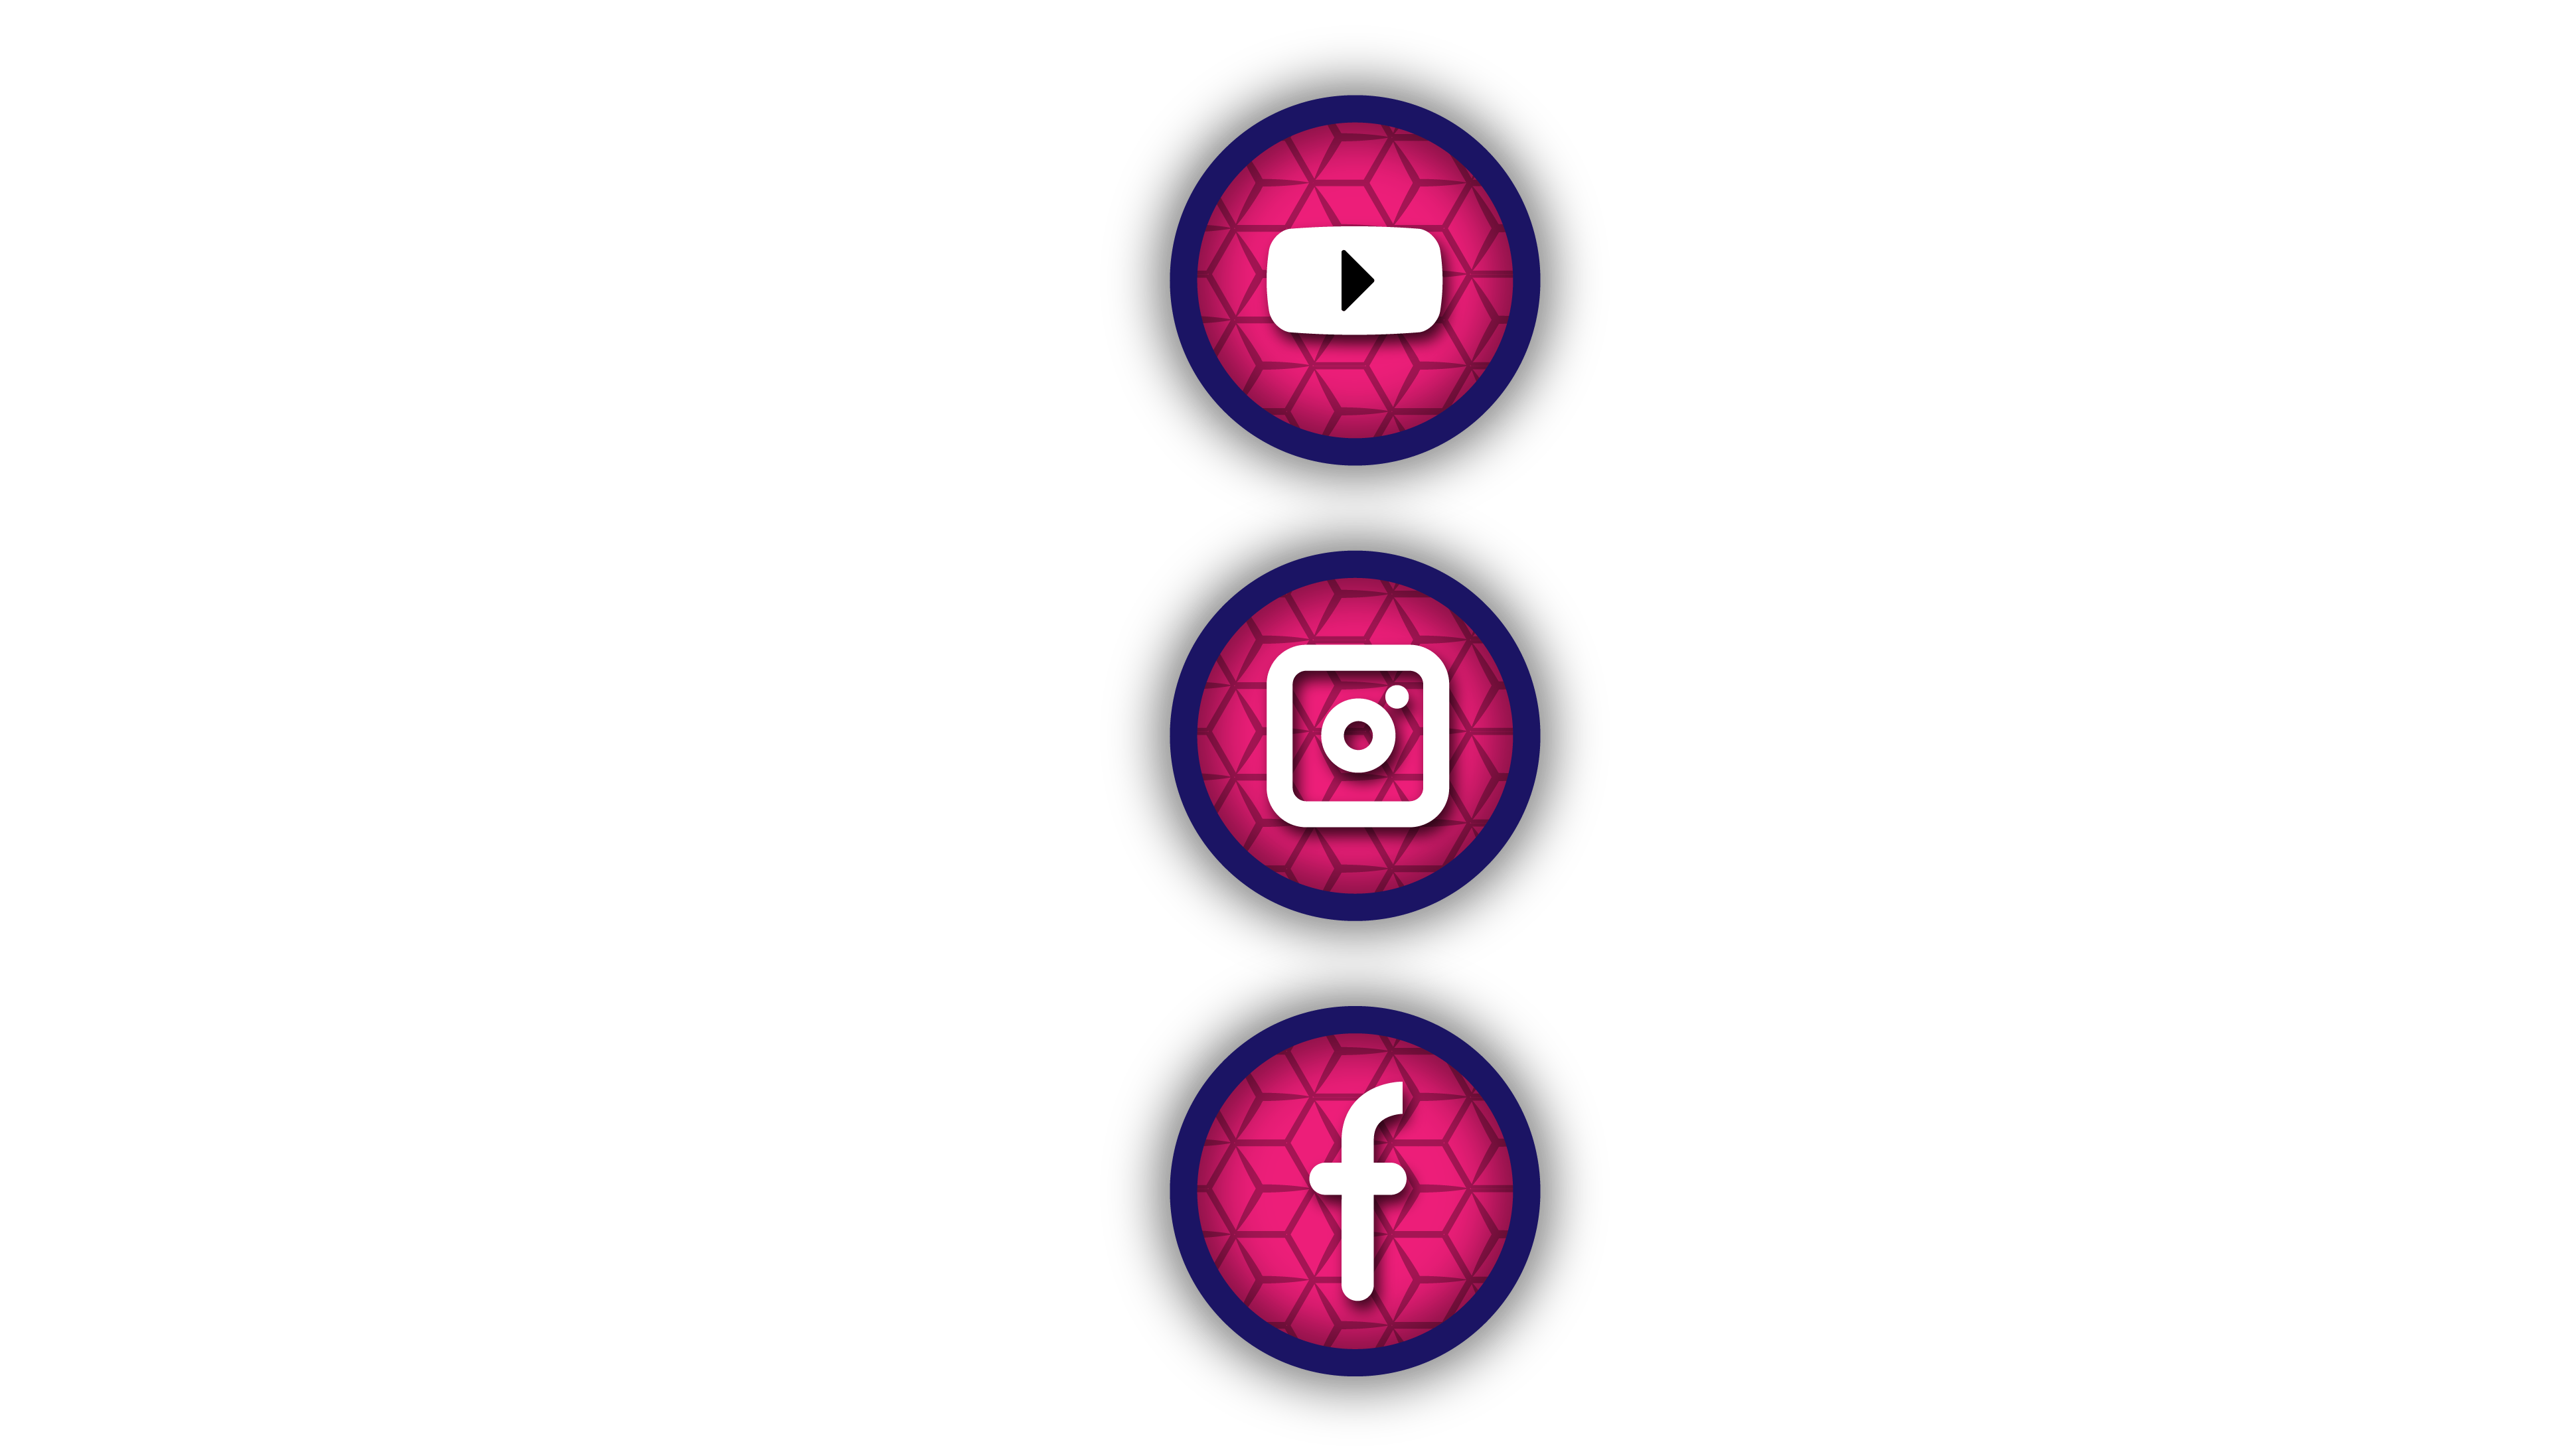 Facebook Instagram Youtube Vector Design Images, Social Media Facebook  Instagram And Youtube, Social Media Clipart, Buttons, Icon PNG Image For  Free Download